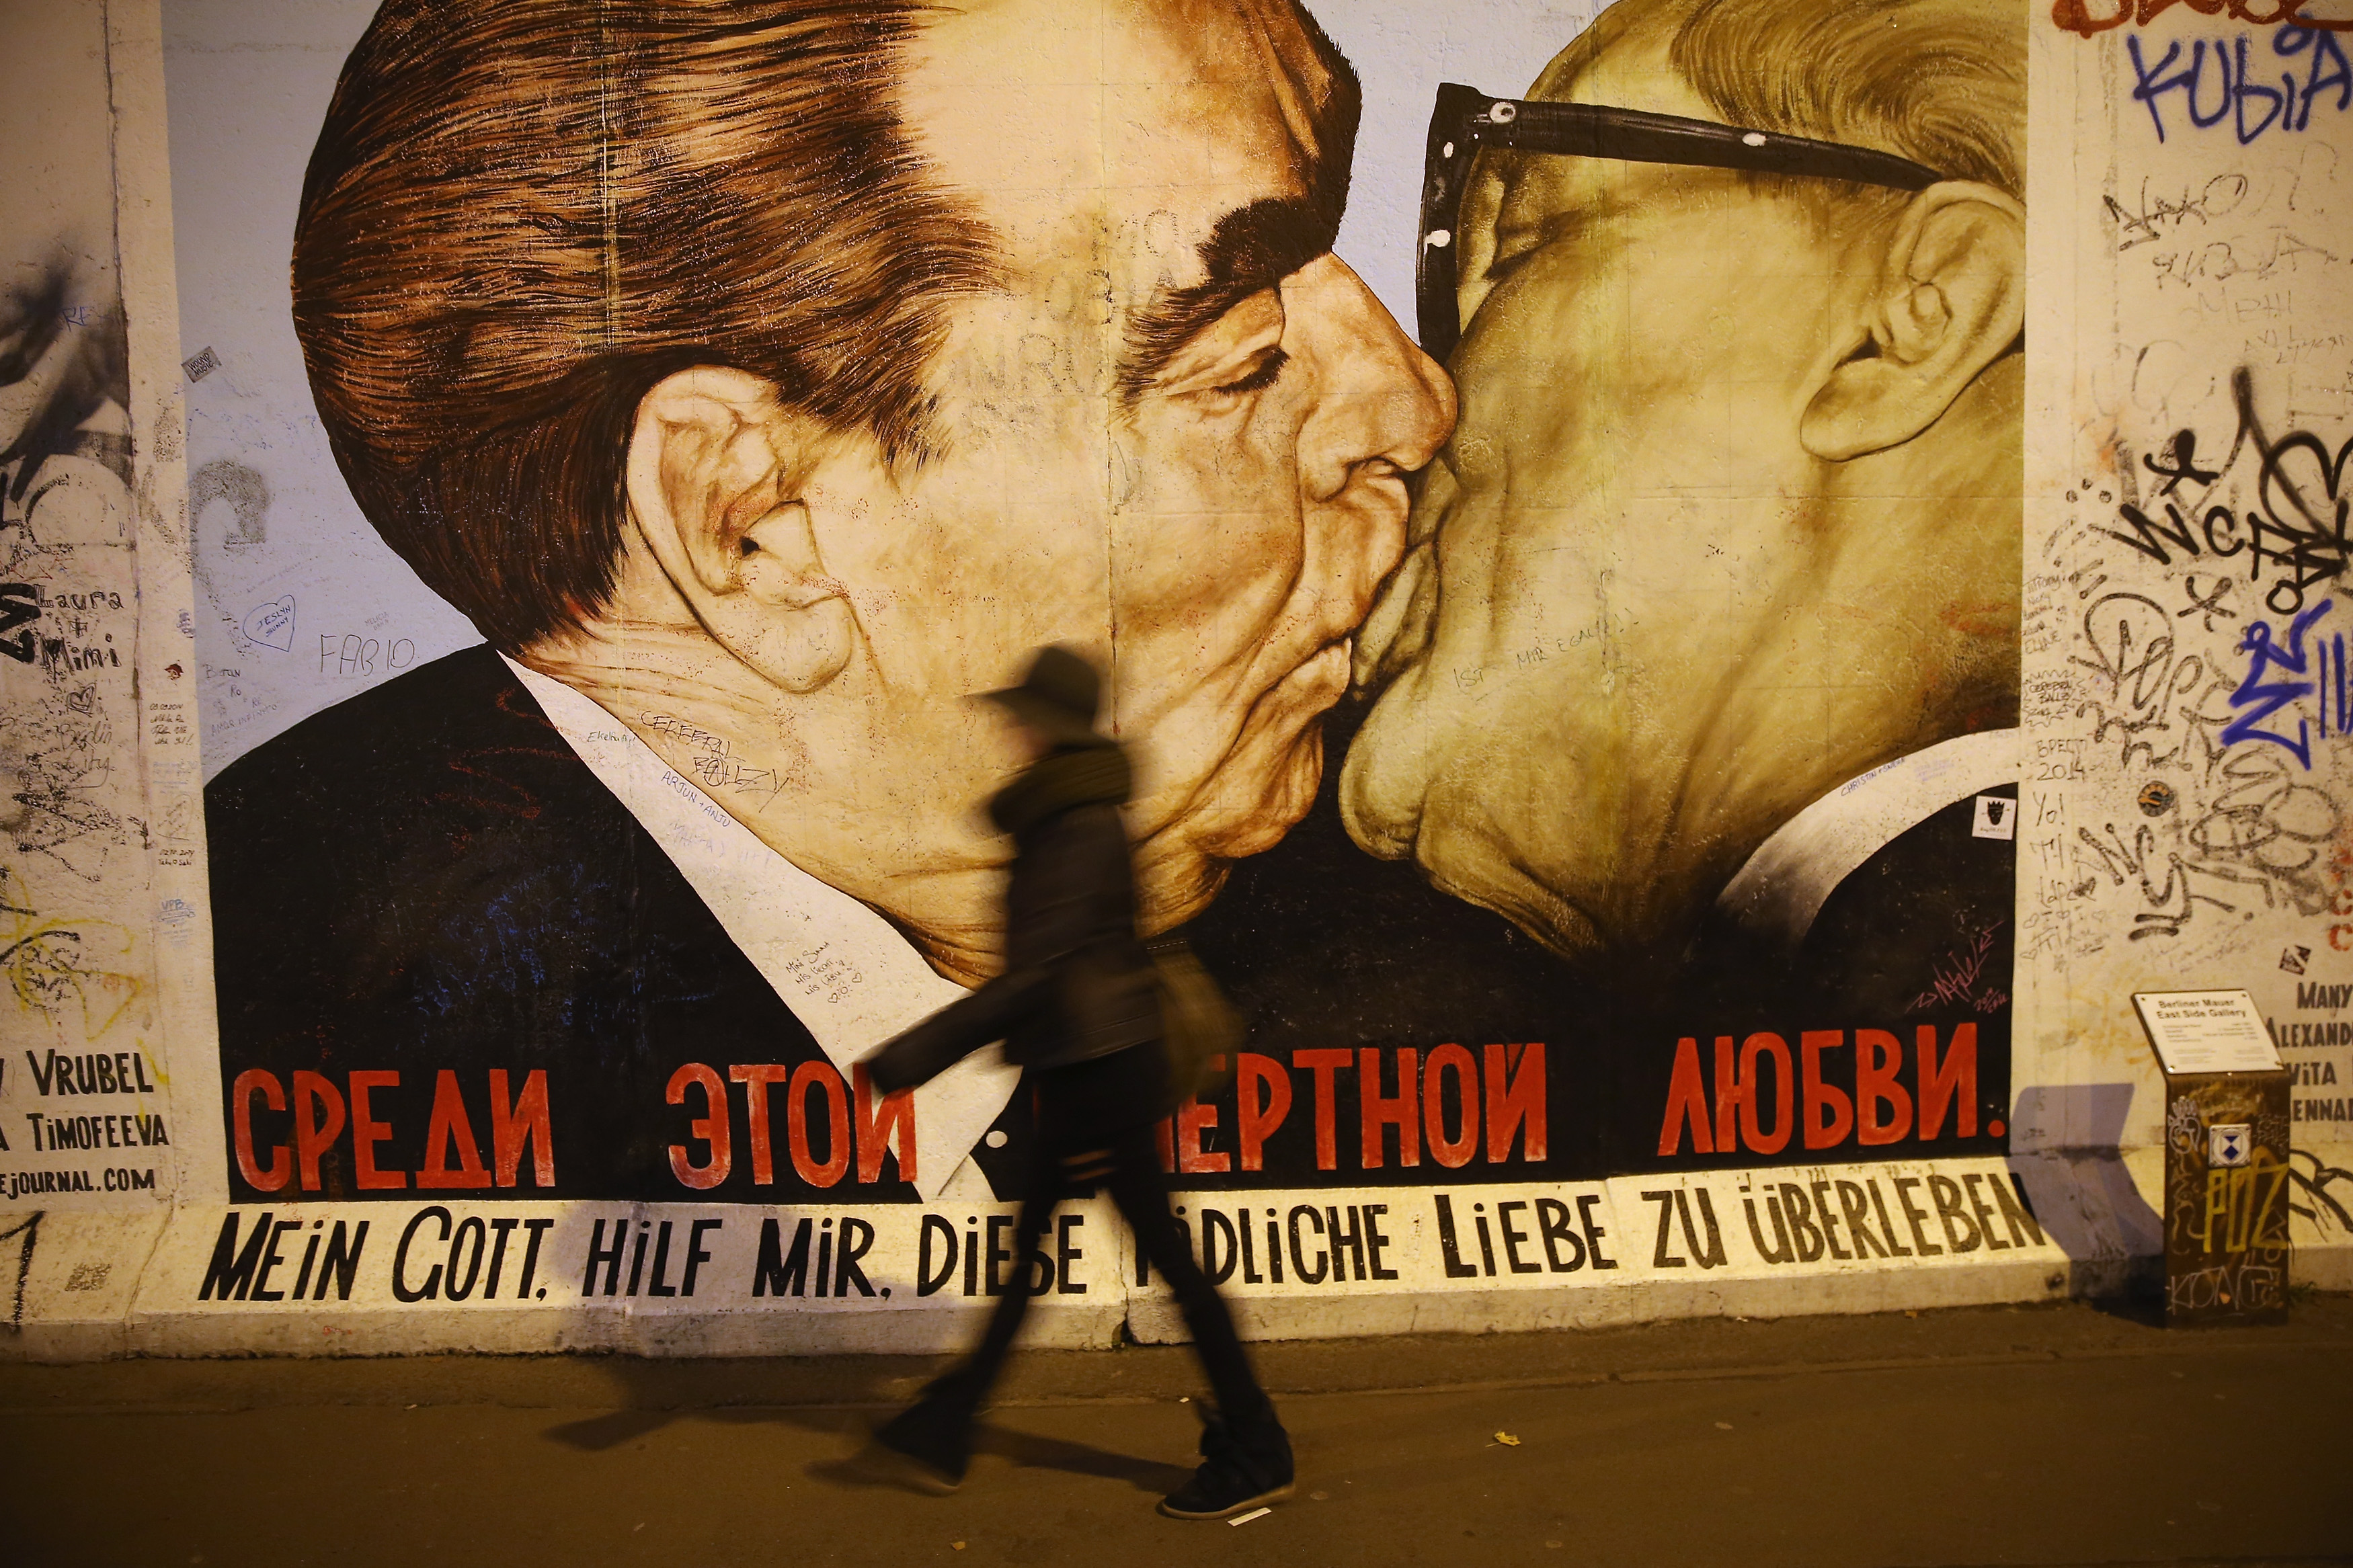 A visitor walks past a mural showing former Soviet leader Leonid Brezhnev (L) kissing former East German communist leader Erich Honecker by Russian painter Dmitri Vrubel at the East Side Gallery on Oct. 28, 2014 in Berlin, Germany. (Sean Gallup/Getty Images)